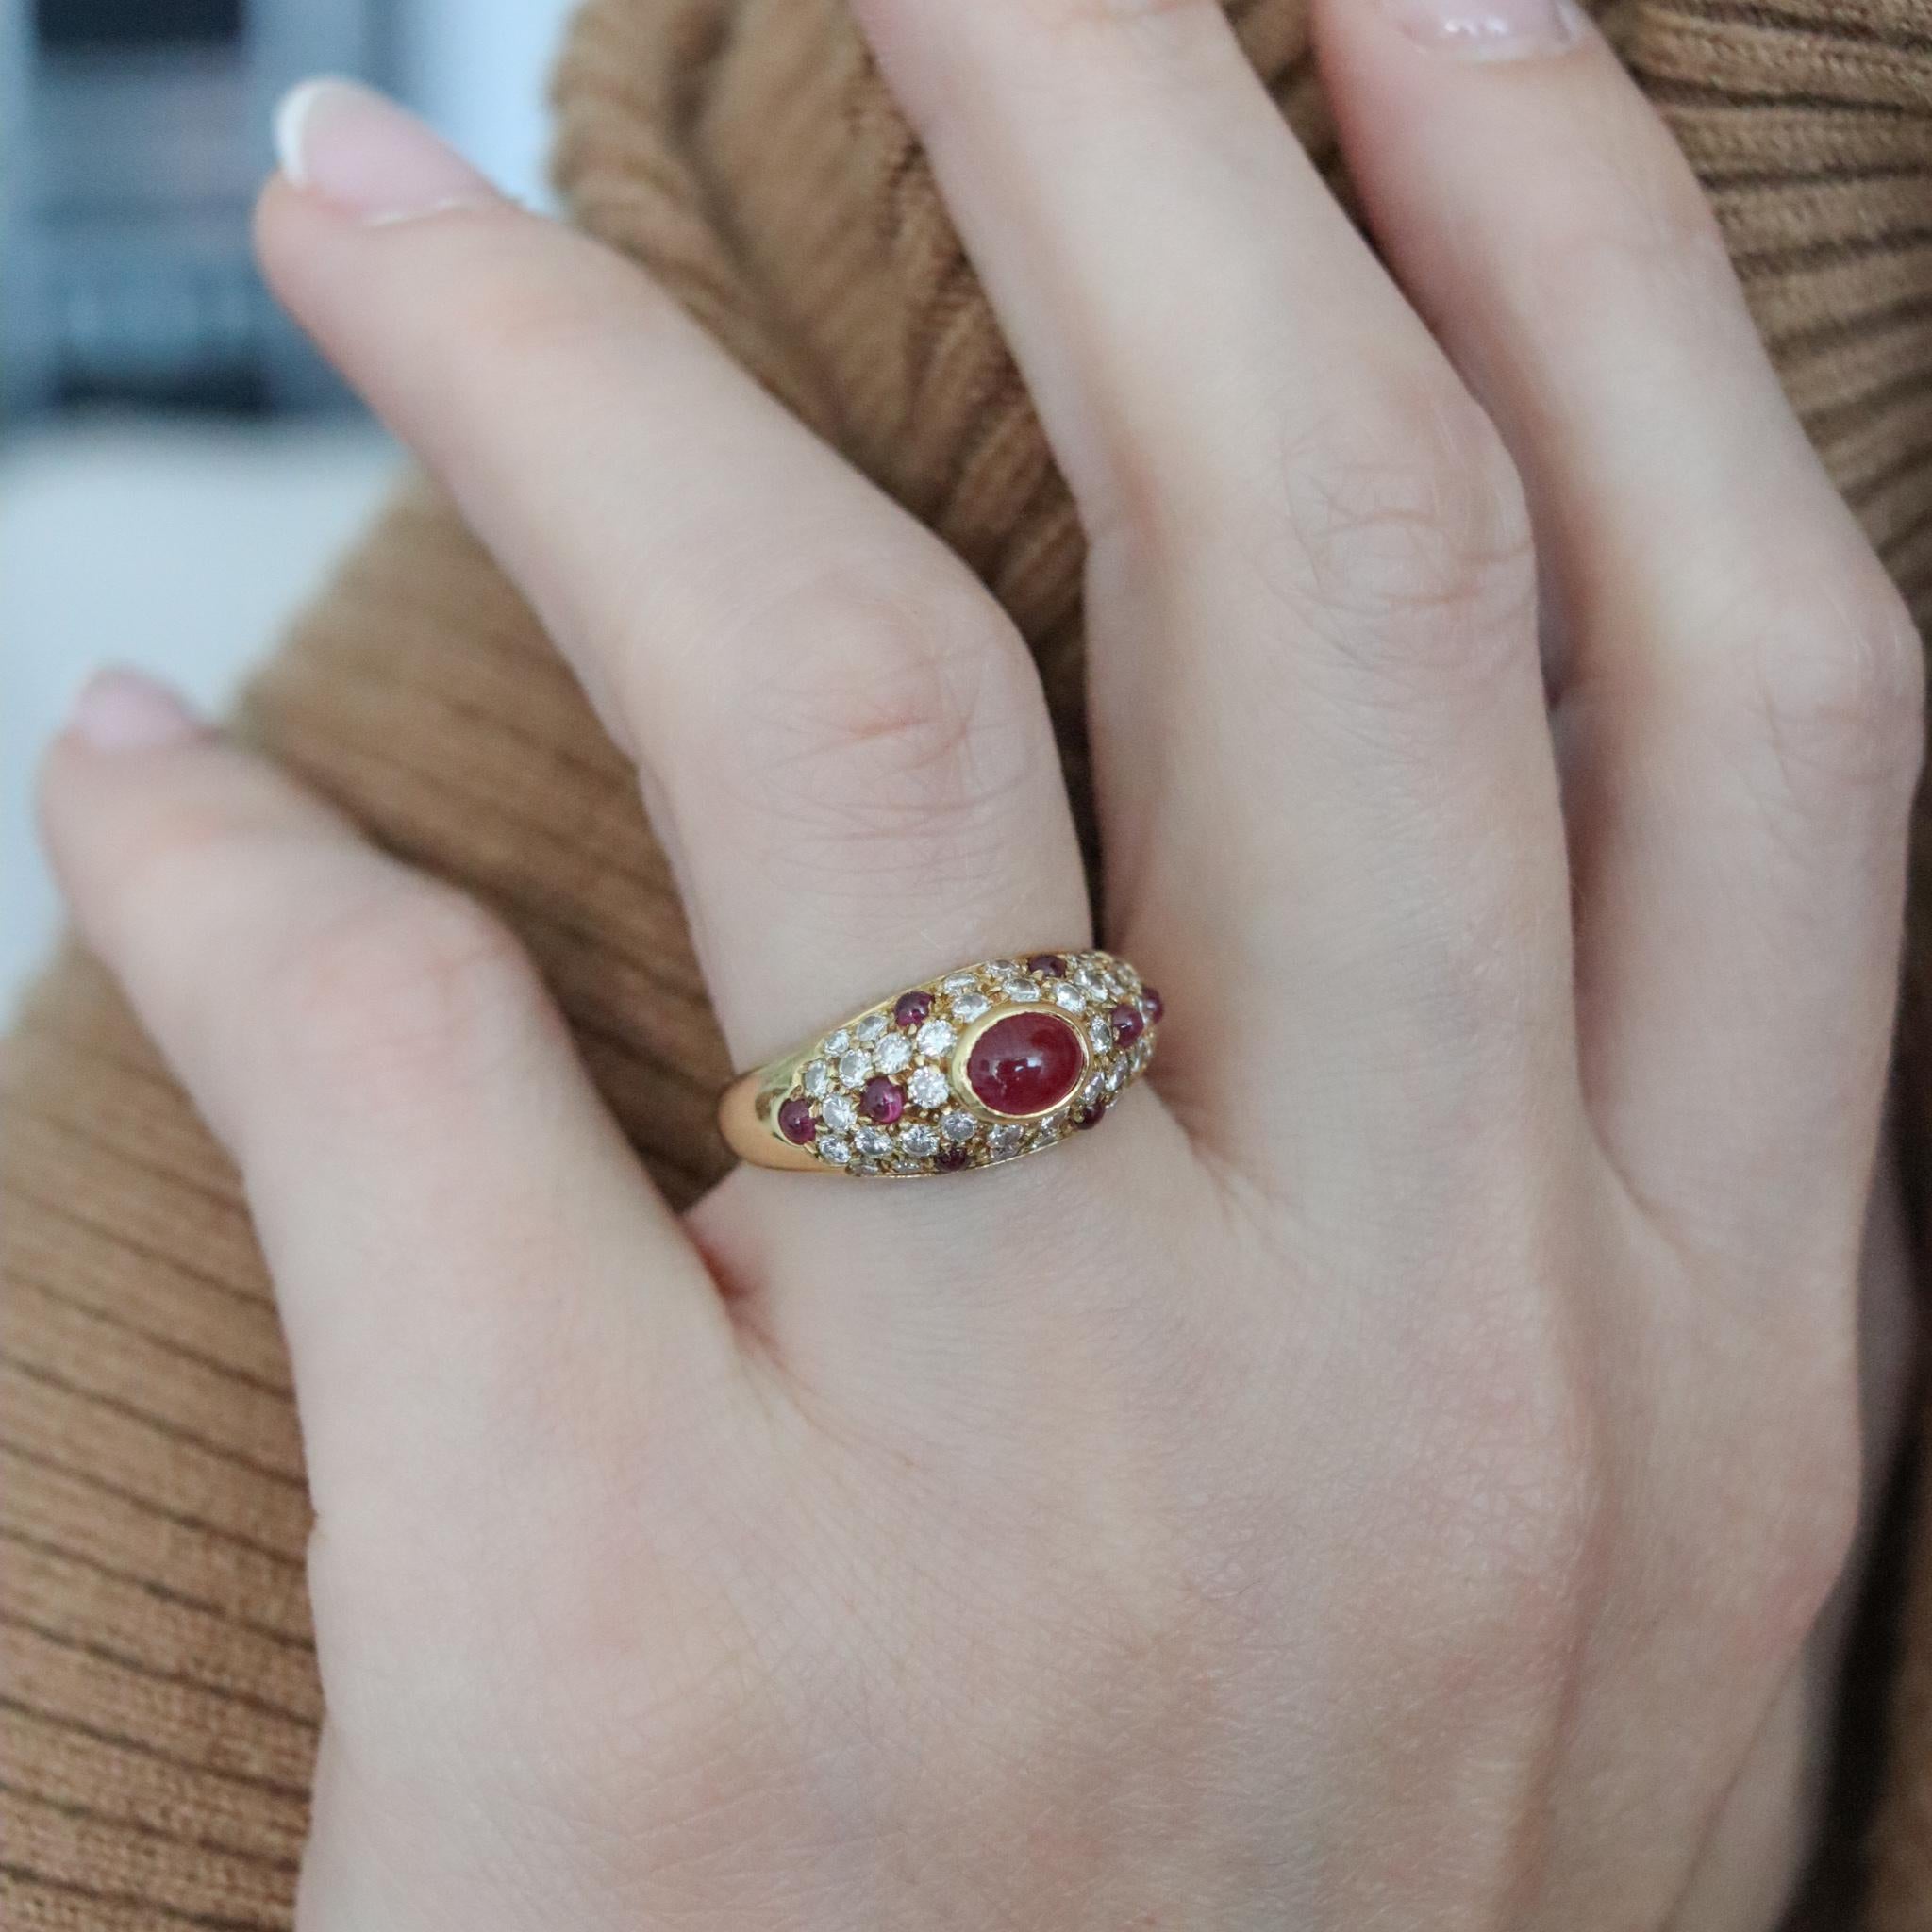 Women's Cartier Paris 1970 Corinth Ring in 18kt Gold with 2.83ctw in Diamonds & Rubies